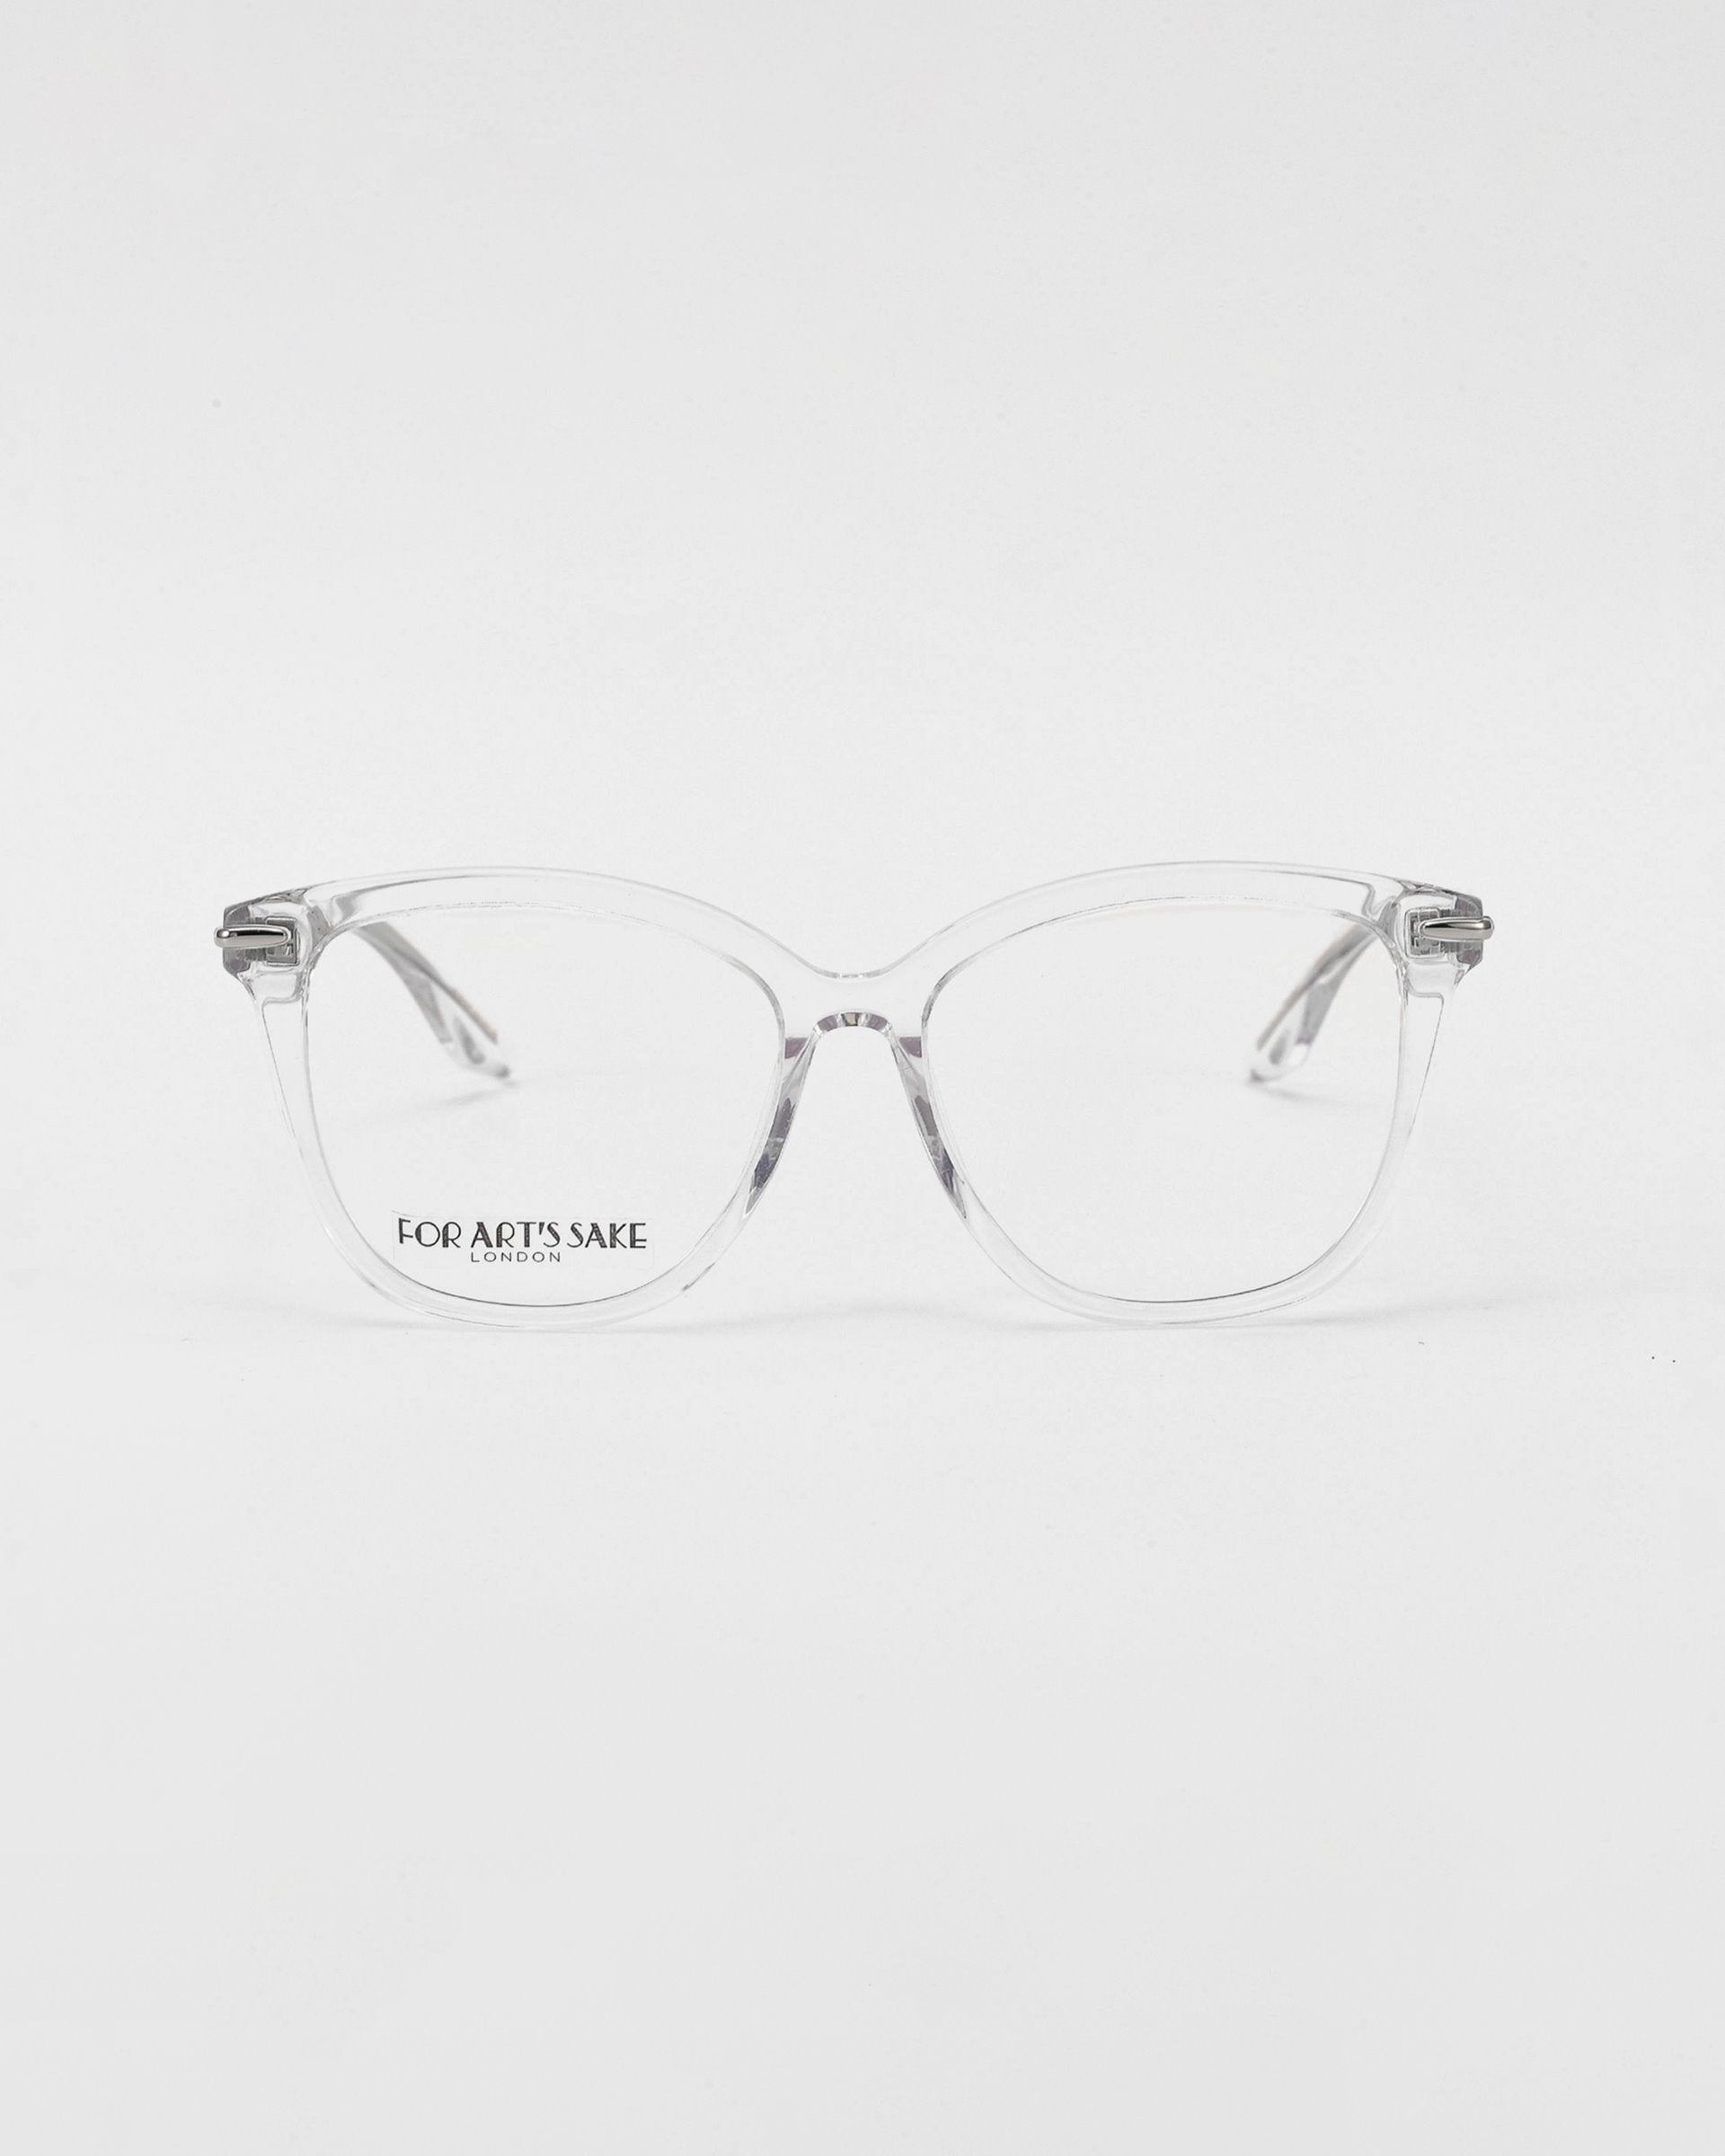 A pair of transparent For Art's Sake® optical glasses with rectangular lenses is centered against a plain white background. The text "FOR ART'S SAKE" appears on one lens near the bridge. The Cadenza glasses have a minimalist and modern design, offering an option for prescription service.